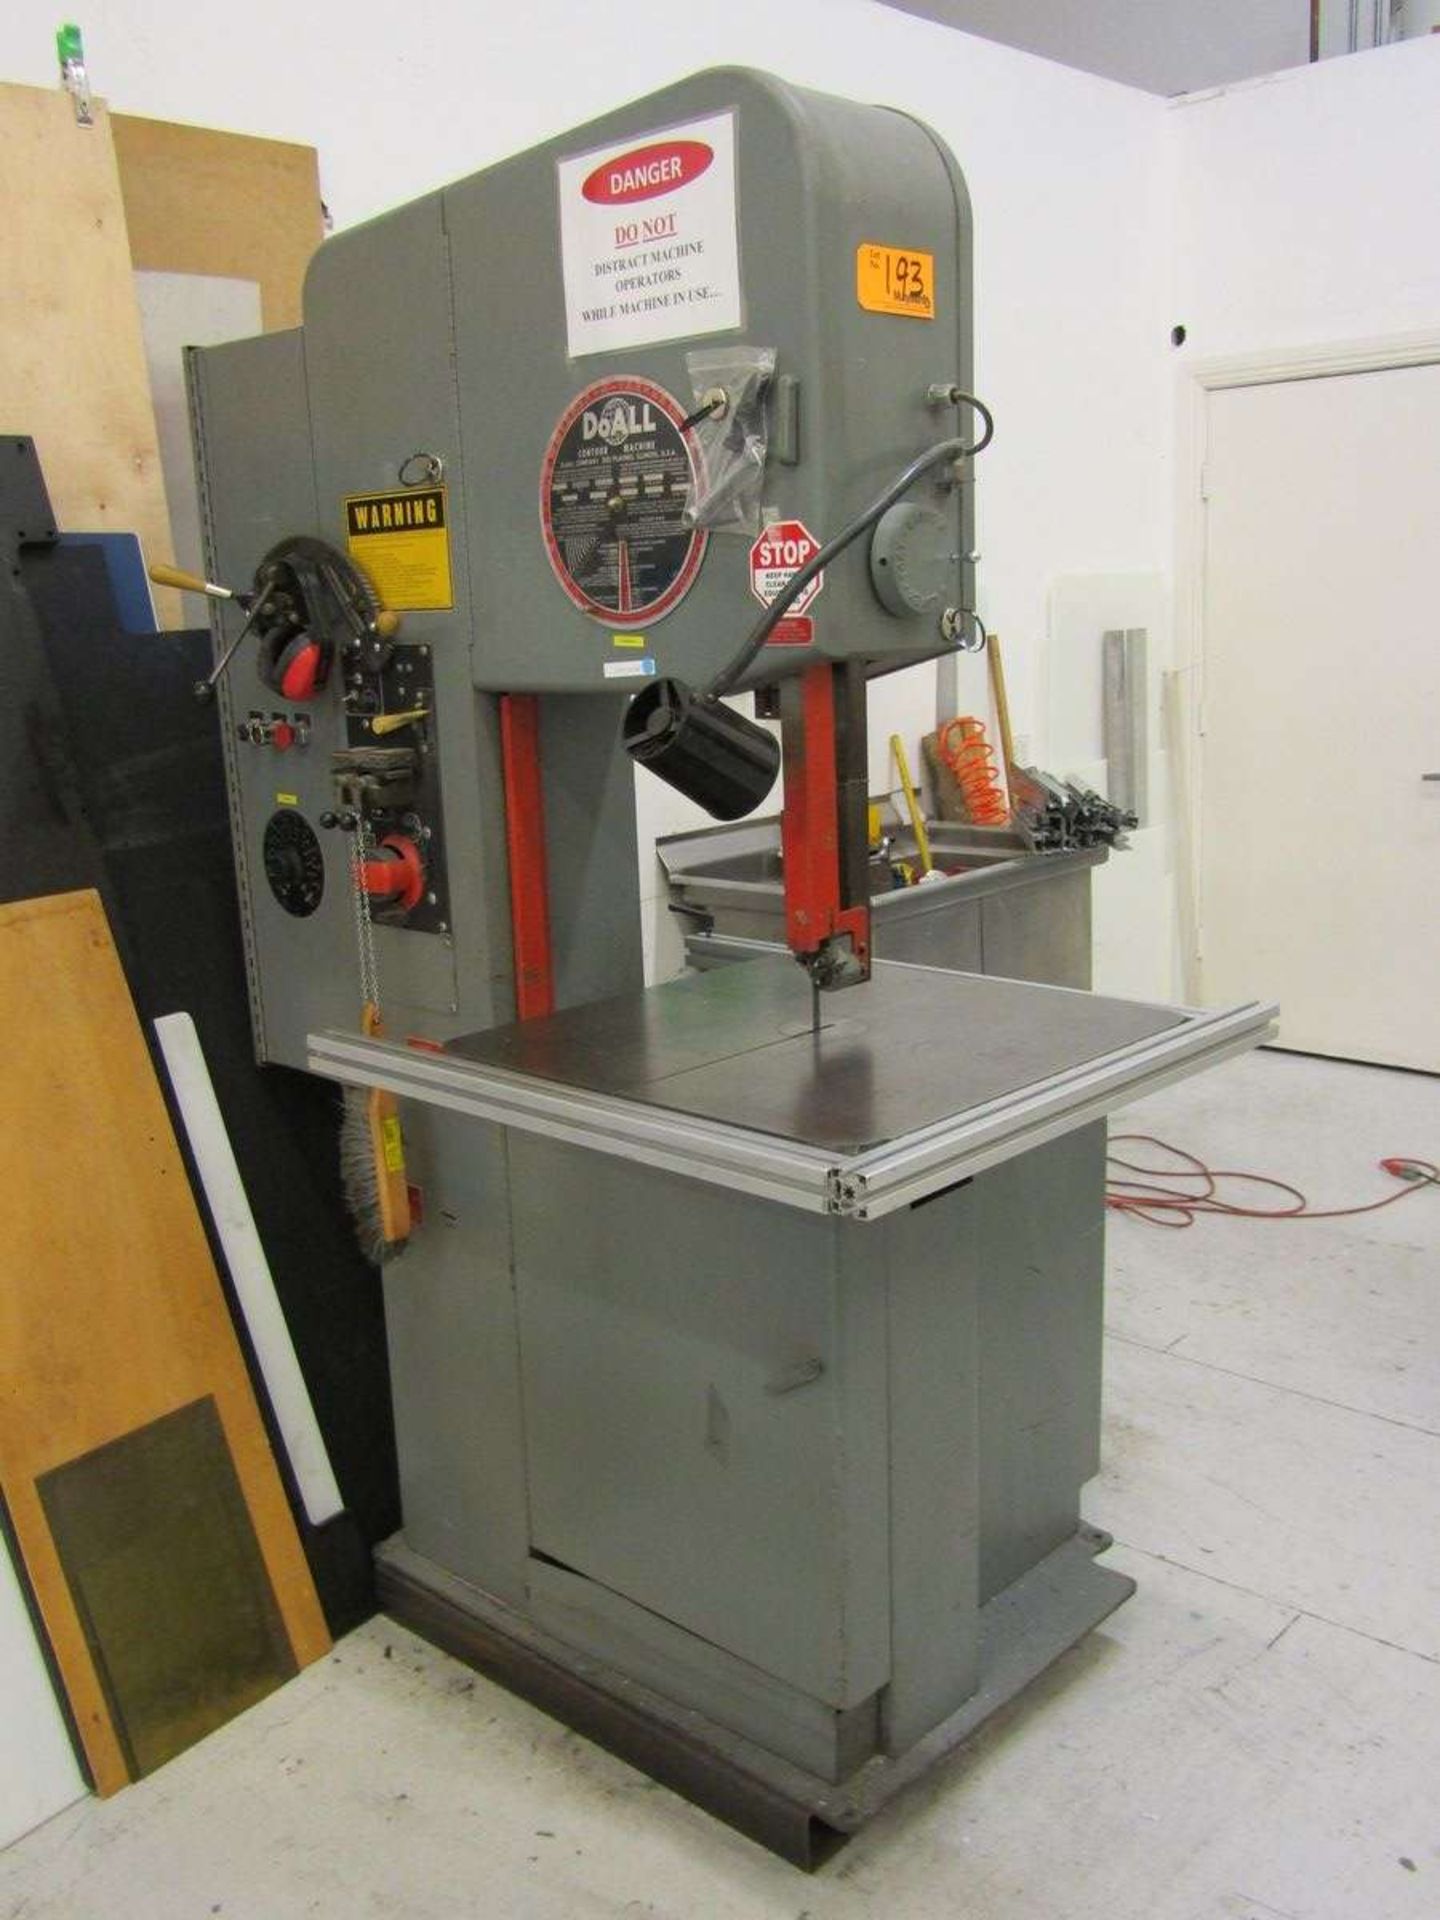 DoAll 20" Vertical Band Saw, Model 2013-2